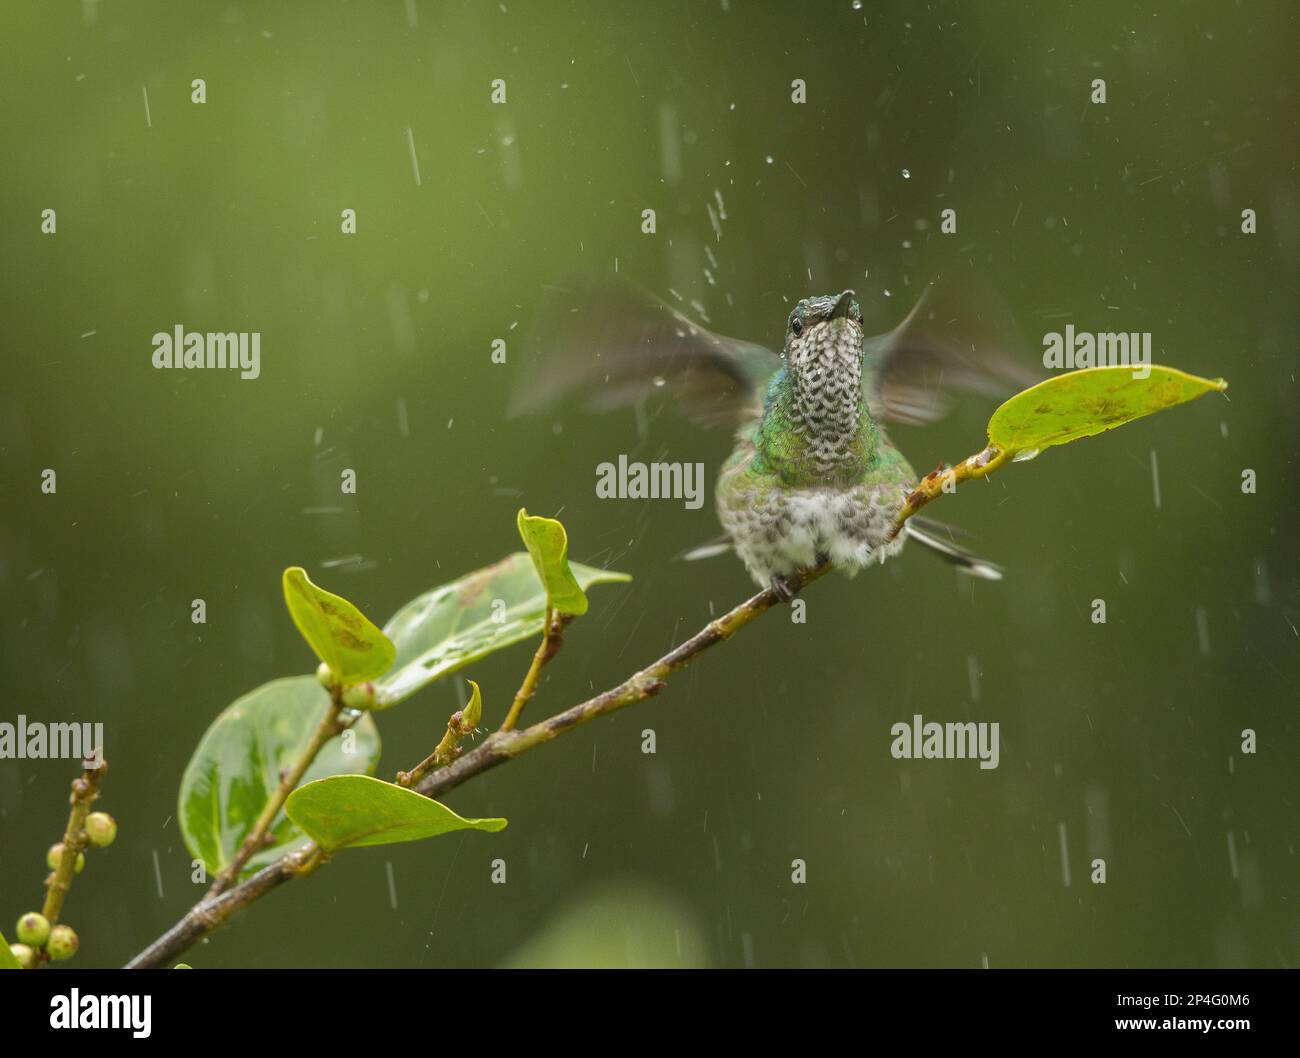 Green-crowned Hummingbird, Green-fronted Hummingbird, Green-crowned Hummingbird, Green-fronted Hummingbird, Green-fronted Hummingbird, Animals Stock Photo